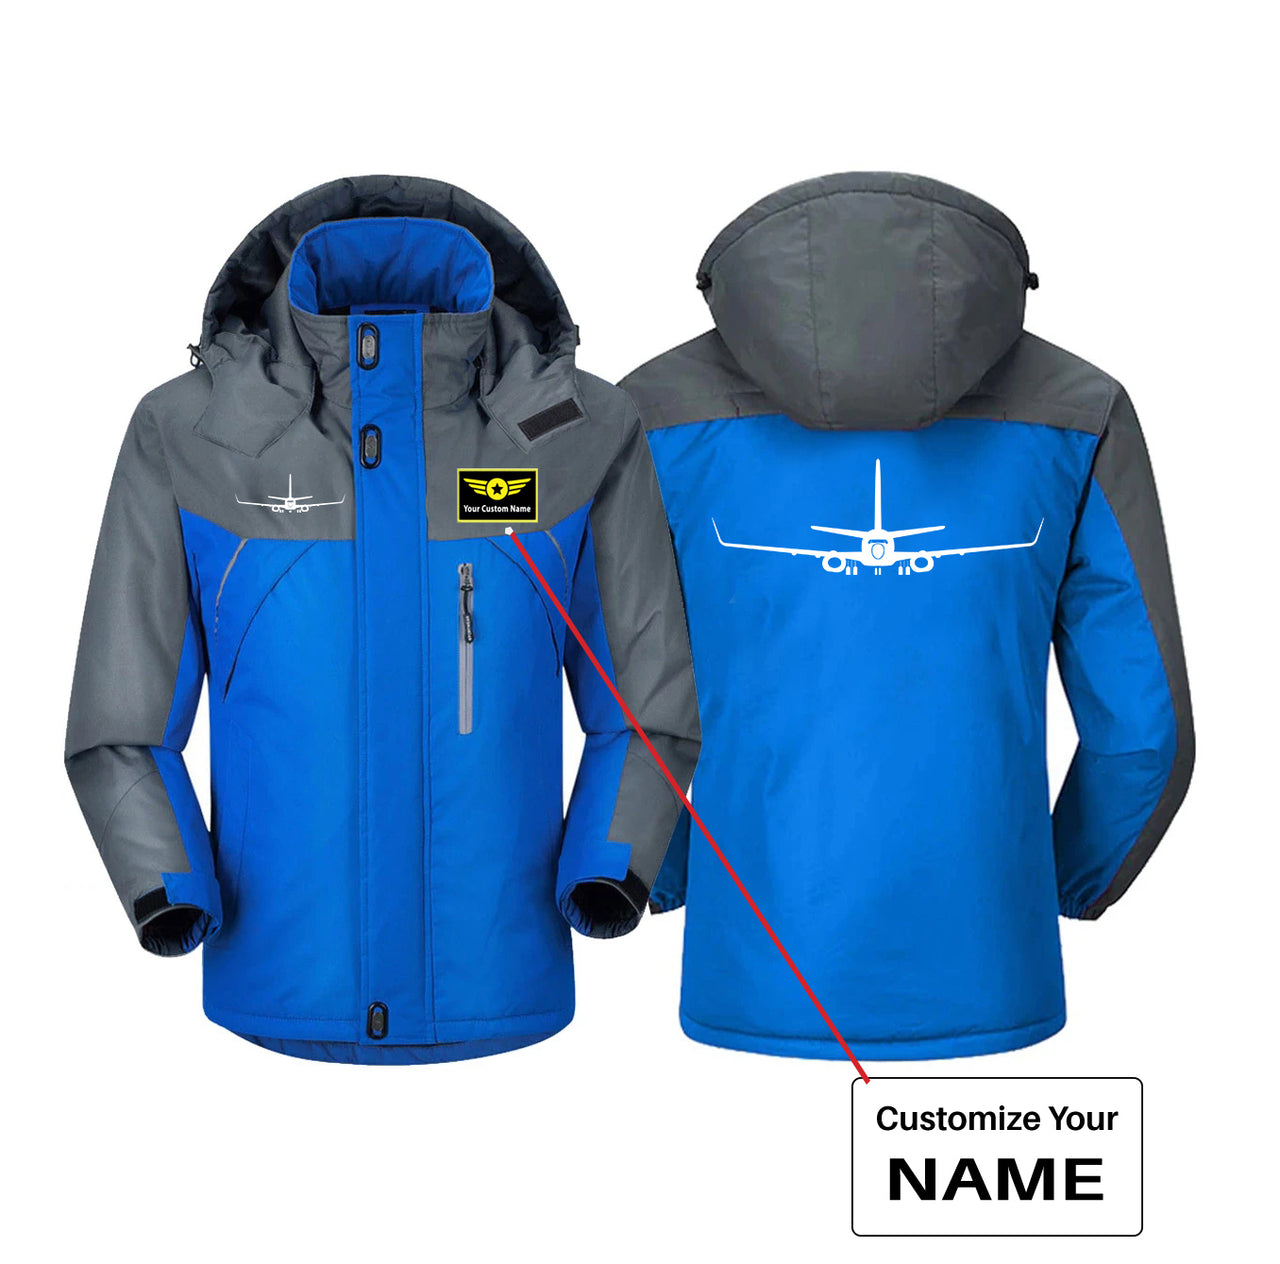 Boeing 737-800NG Silhouette Designed Thick Winter Jackets